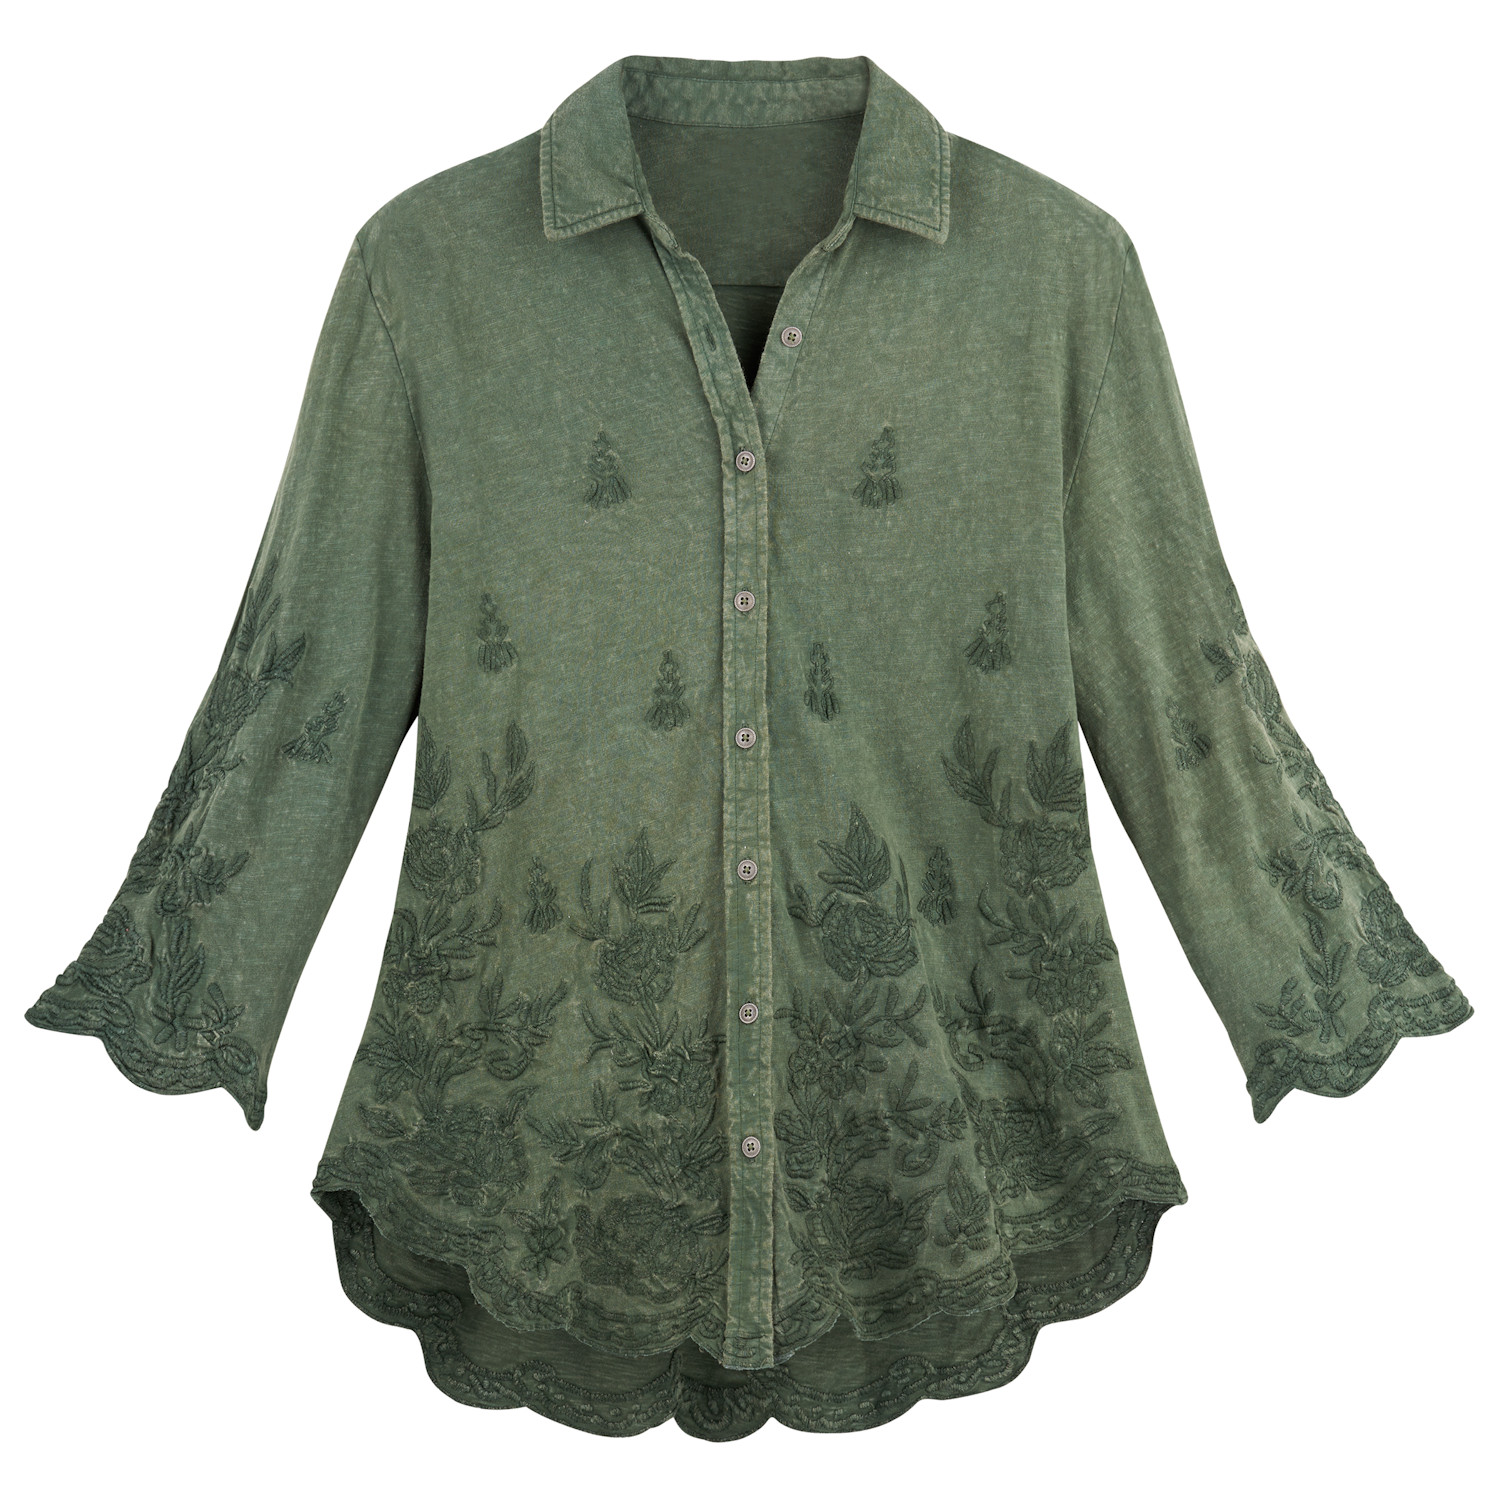 Scalloped Edge Embroidered Shirt | Shop.PBS.org